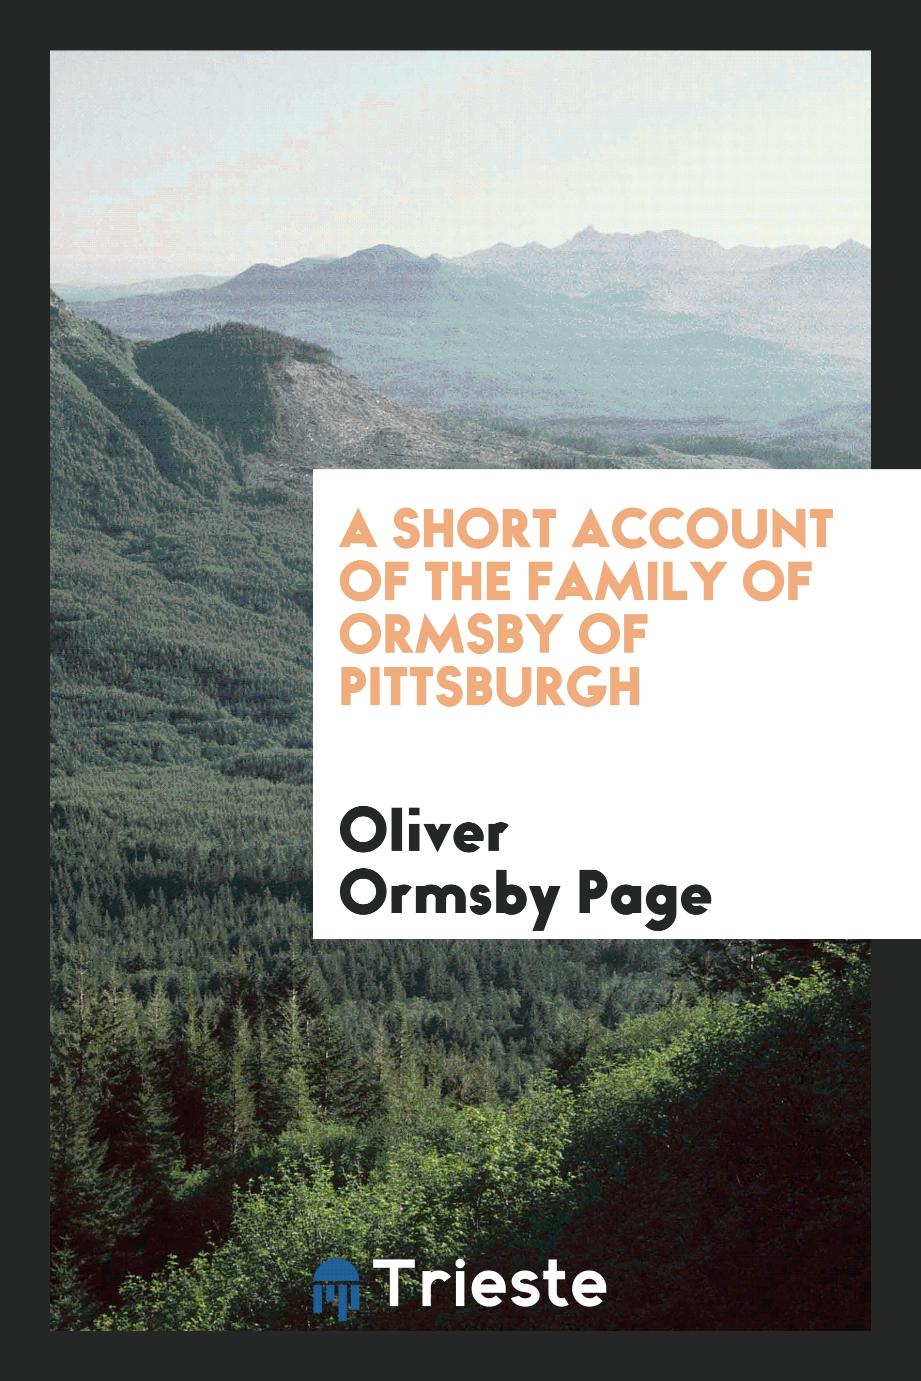 A short account of the family of Ormsby of Pittsburgh